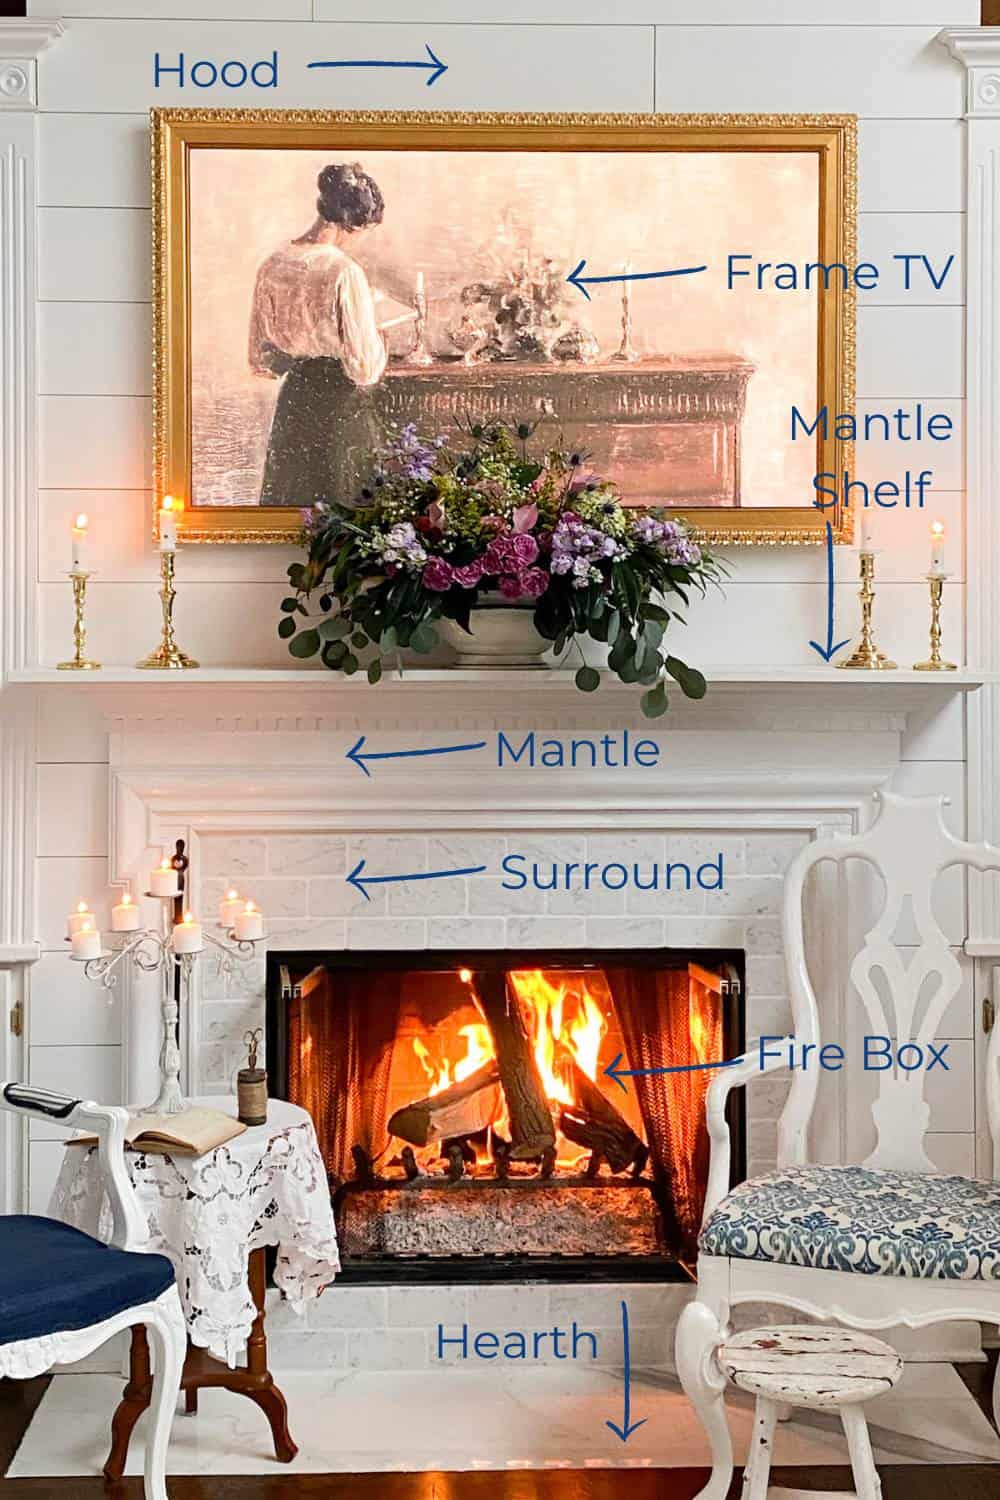 Photo of our living room fireplace with text overlay to identify all the components of a fireplace and surround